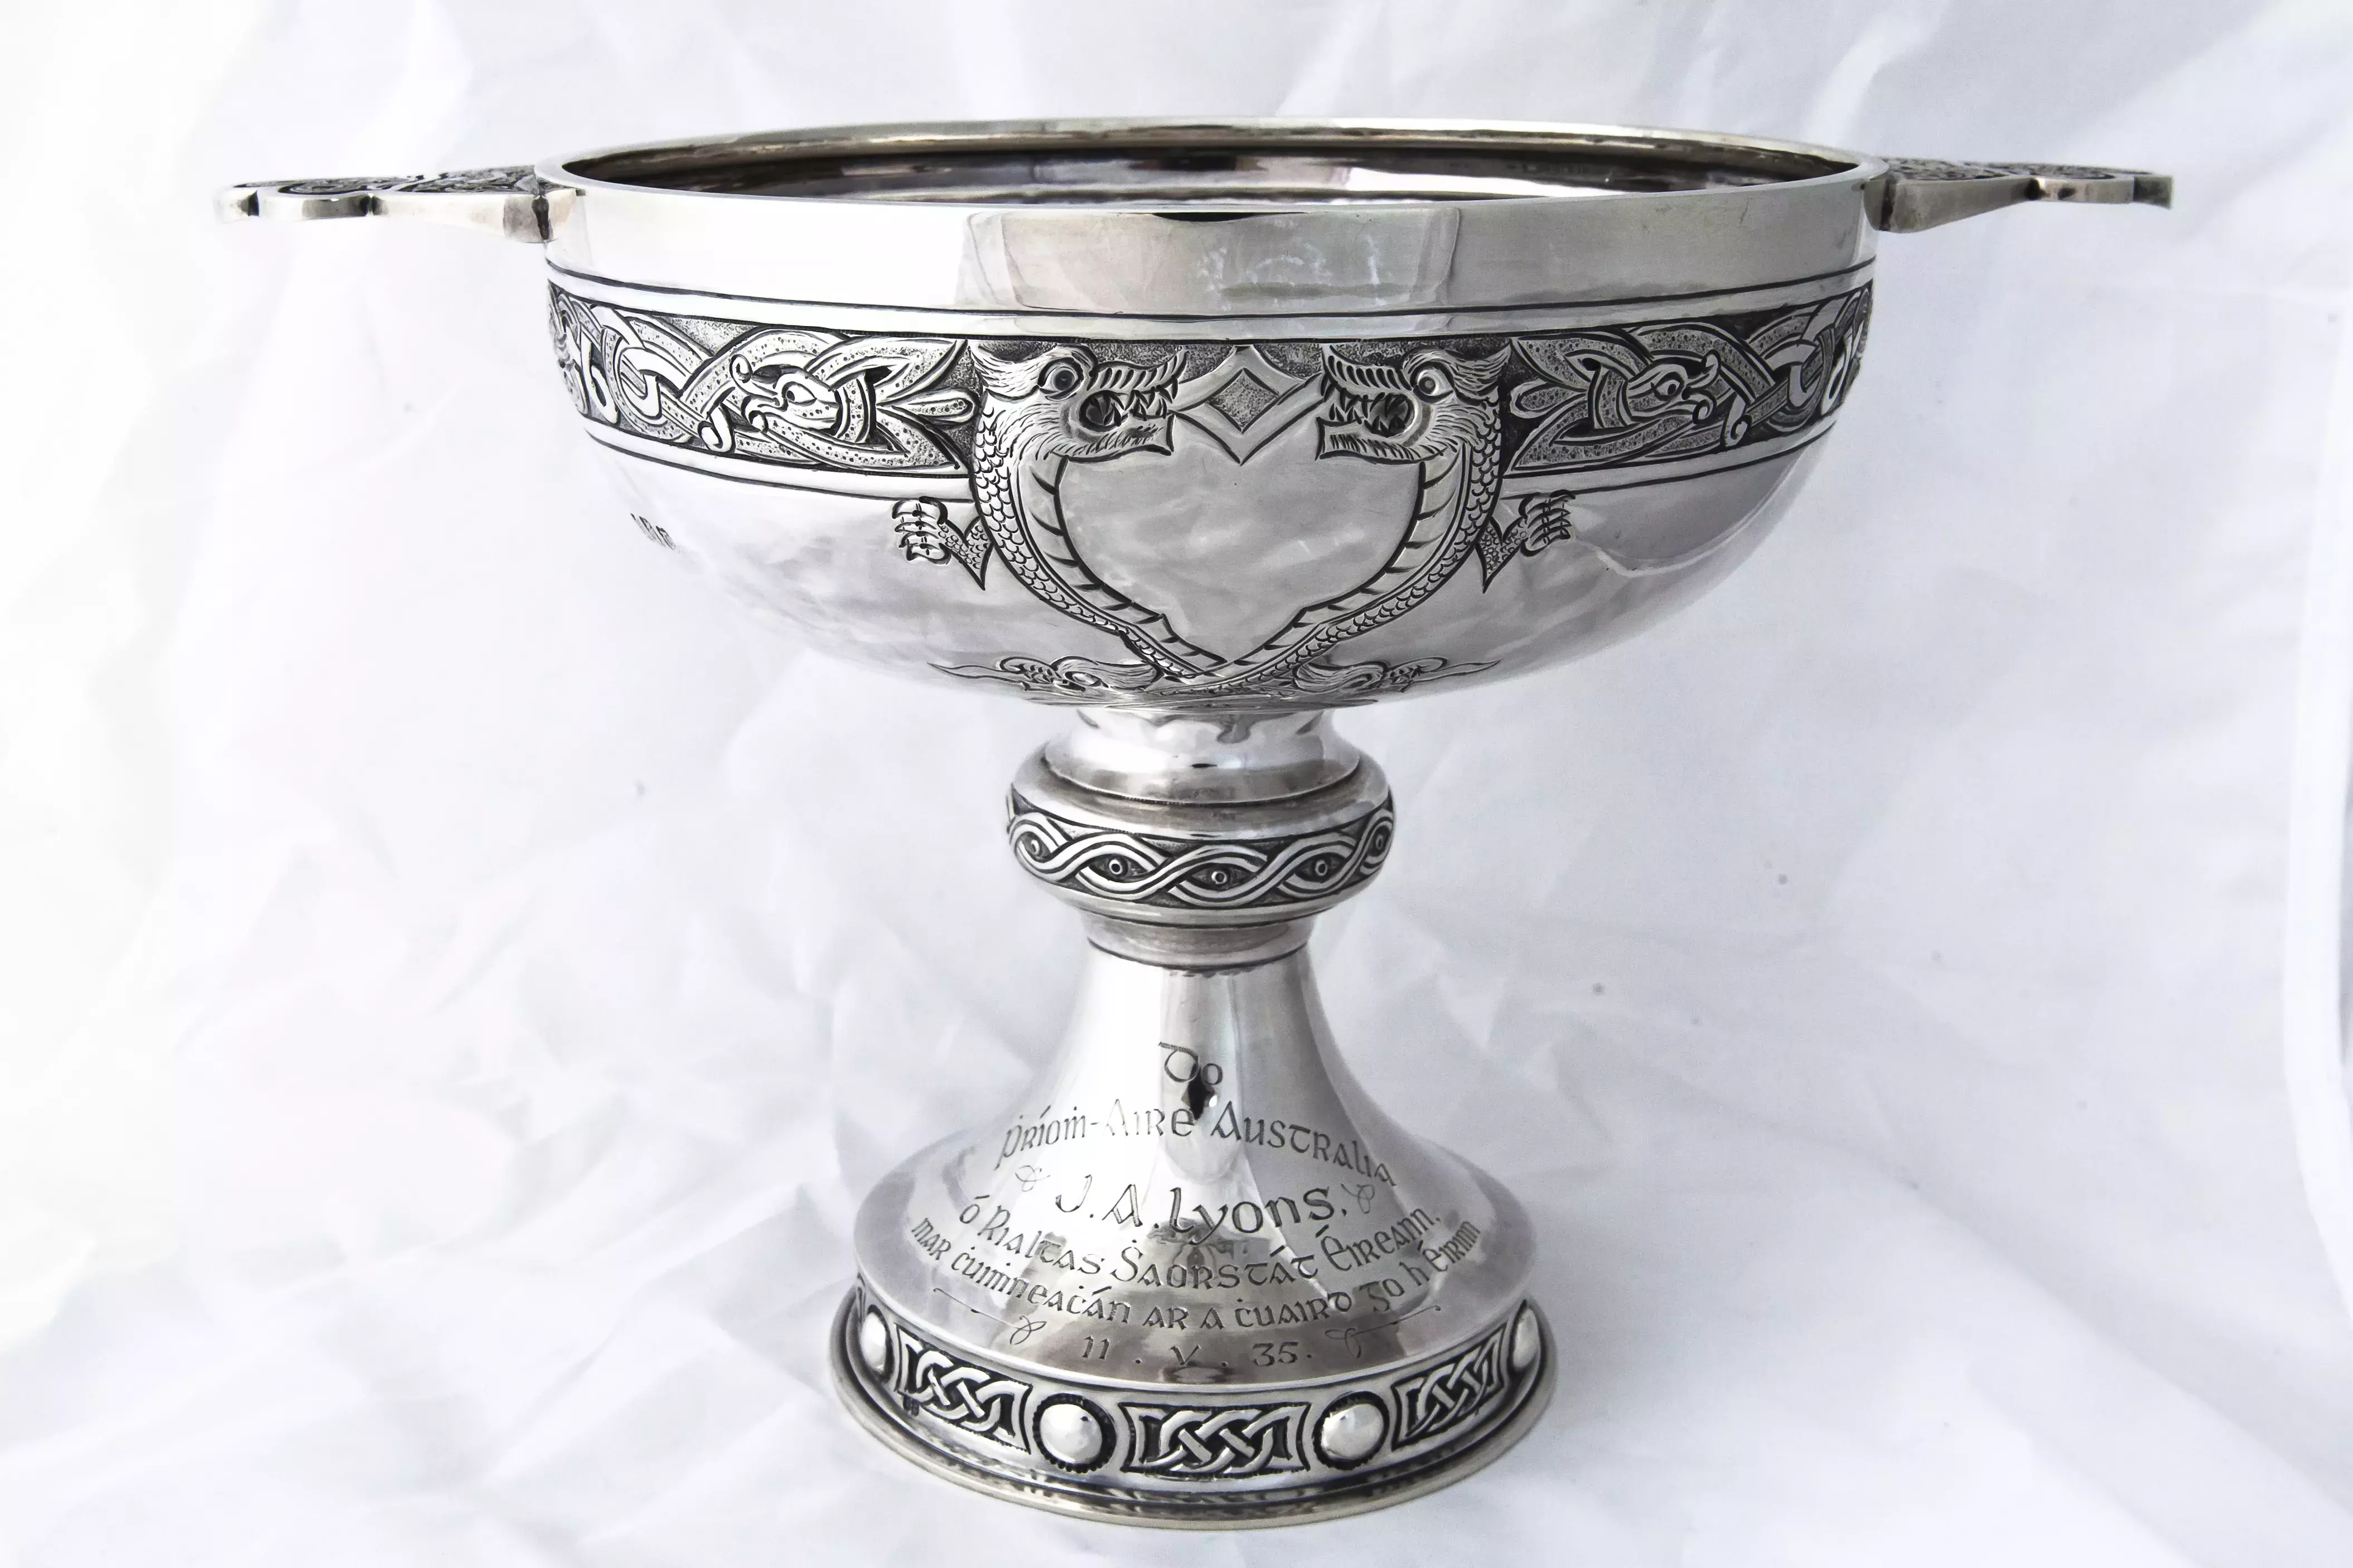 An ornate silver goblet with engraved decorations 